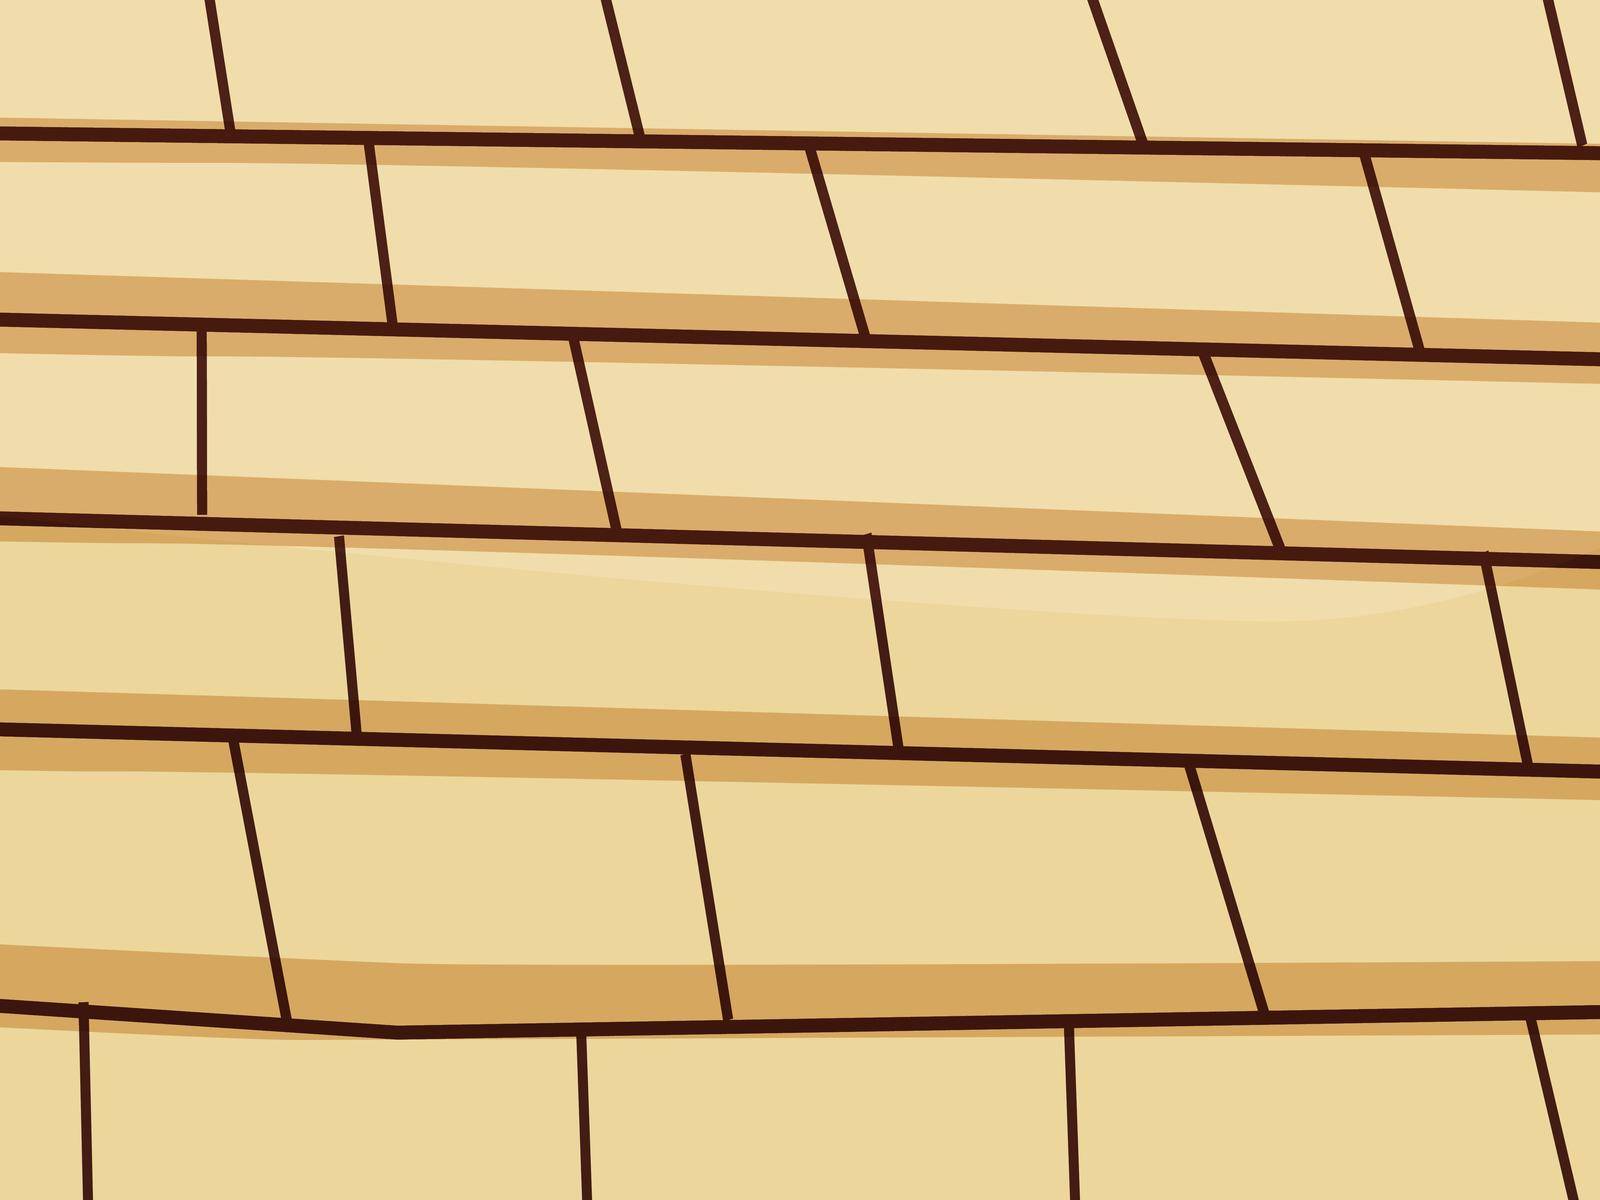 Illustration of a wood texture